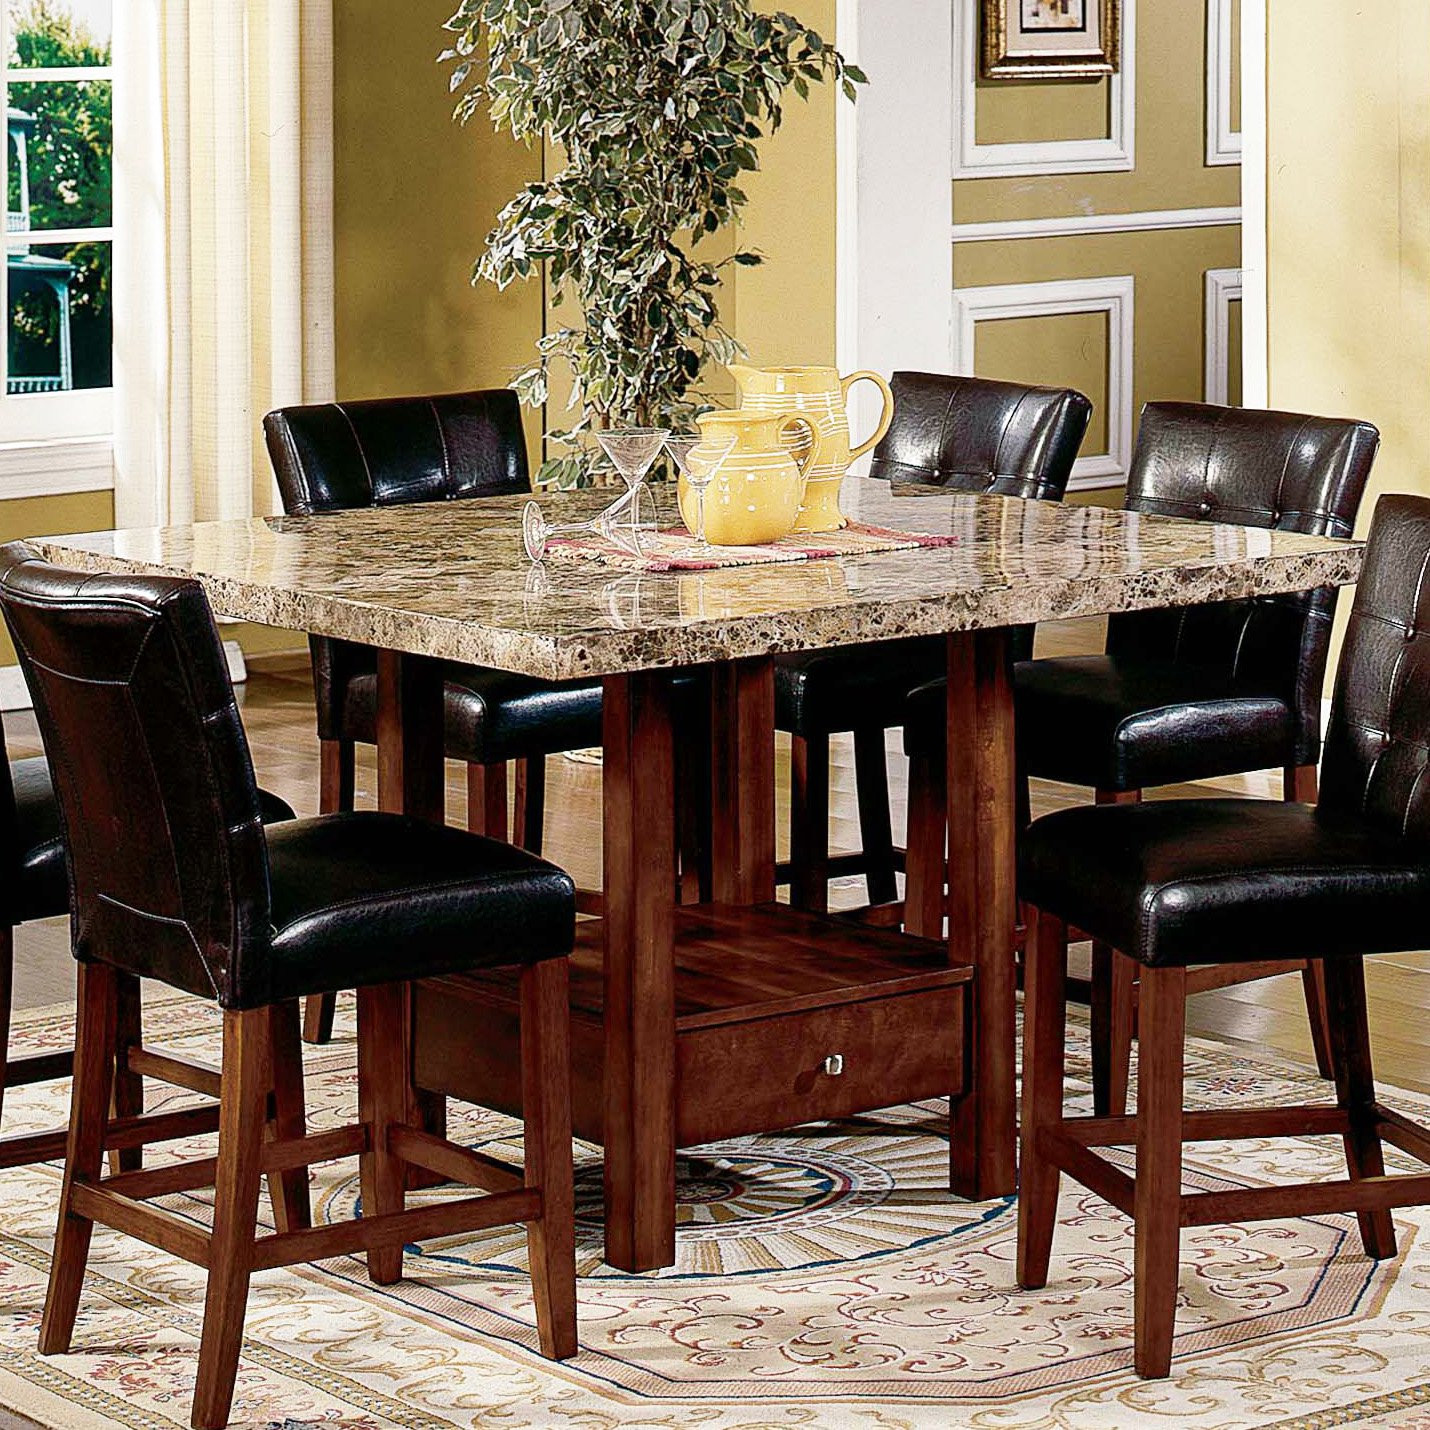 Small Tall Kitchen Table Beautiful High Top Kitchen Table Sets Homesfeed Of Small Tall Kitchen Table 